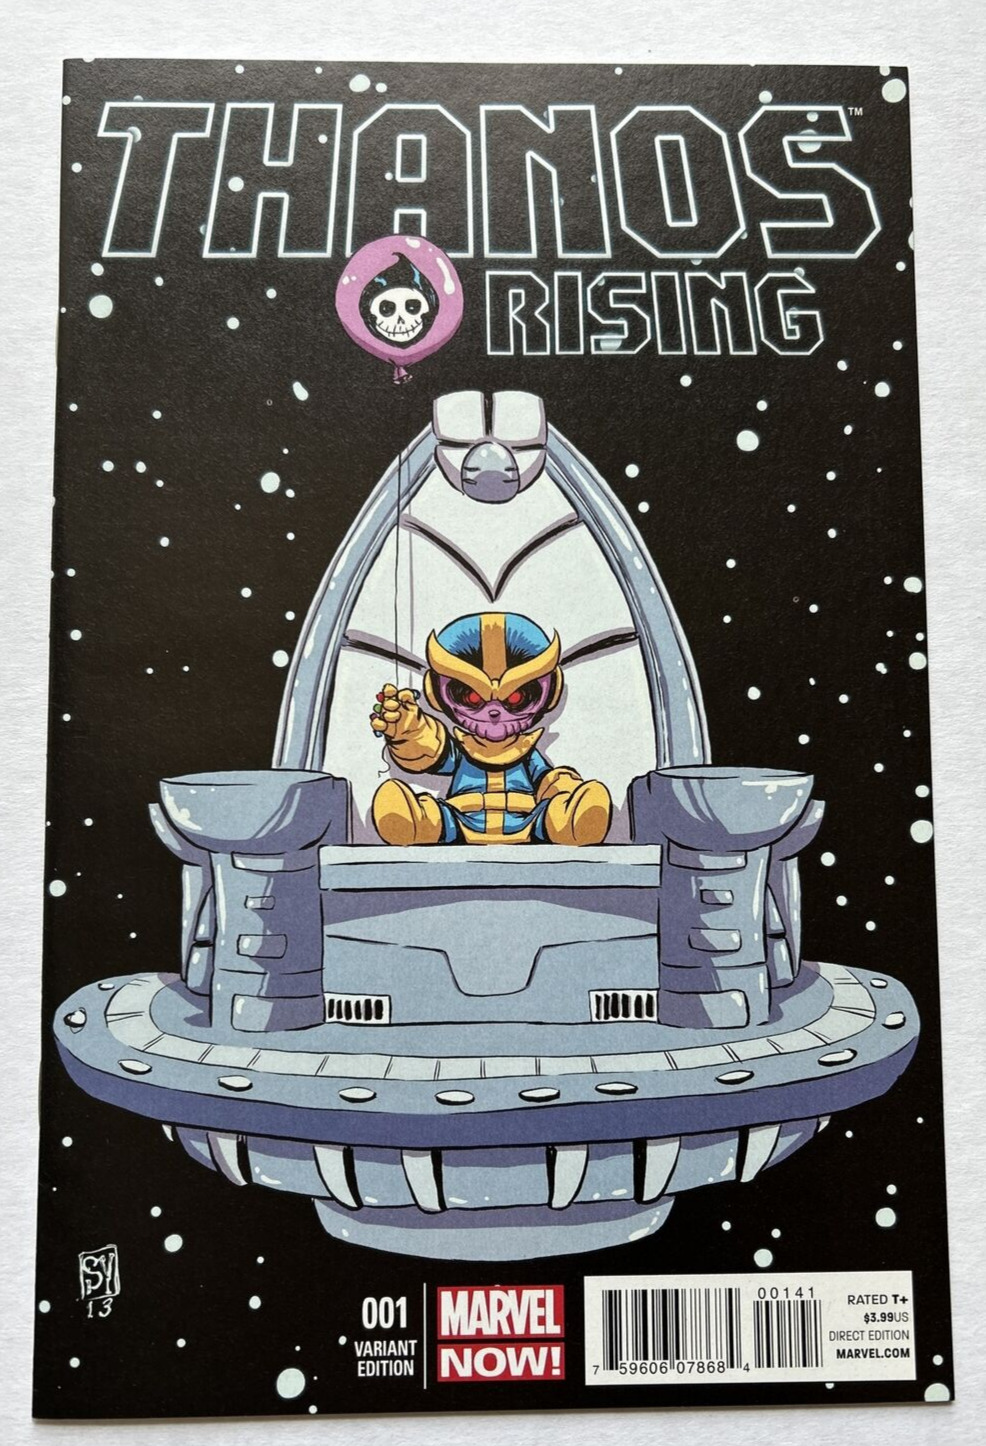 Thanos Rising #1 (2013) -Variant Cover by Skottie Young